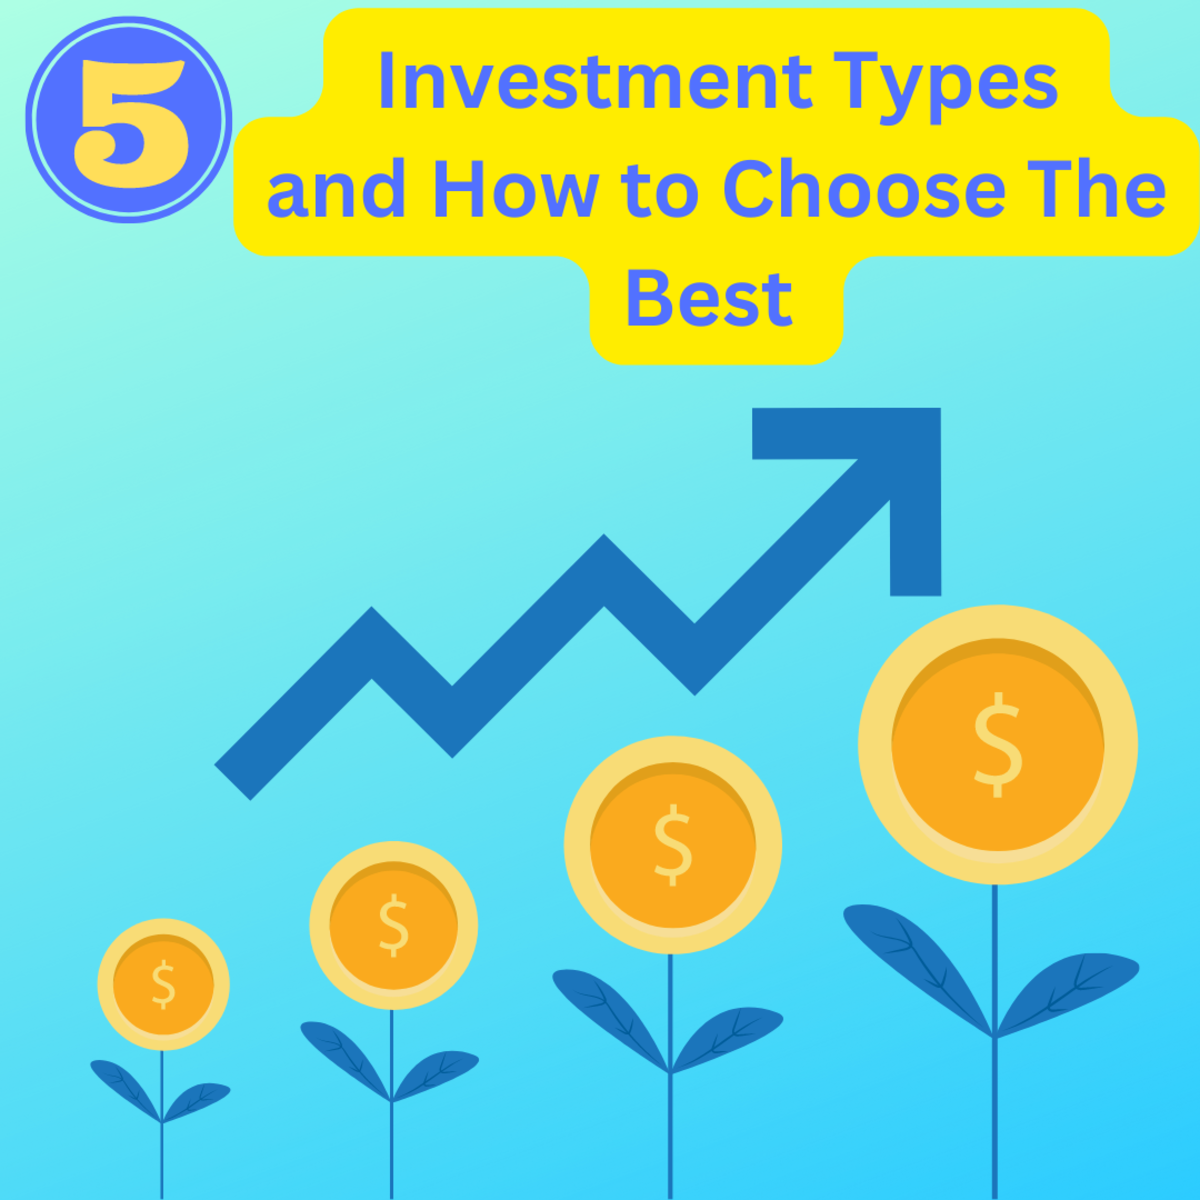 5 Investment Types and How to Choose the Best Ones